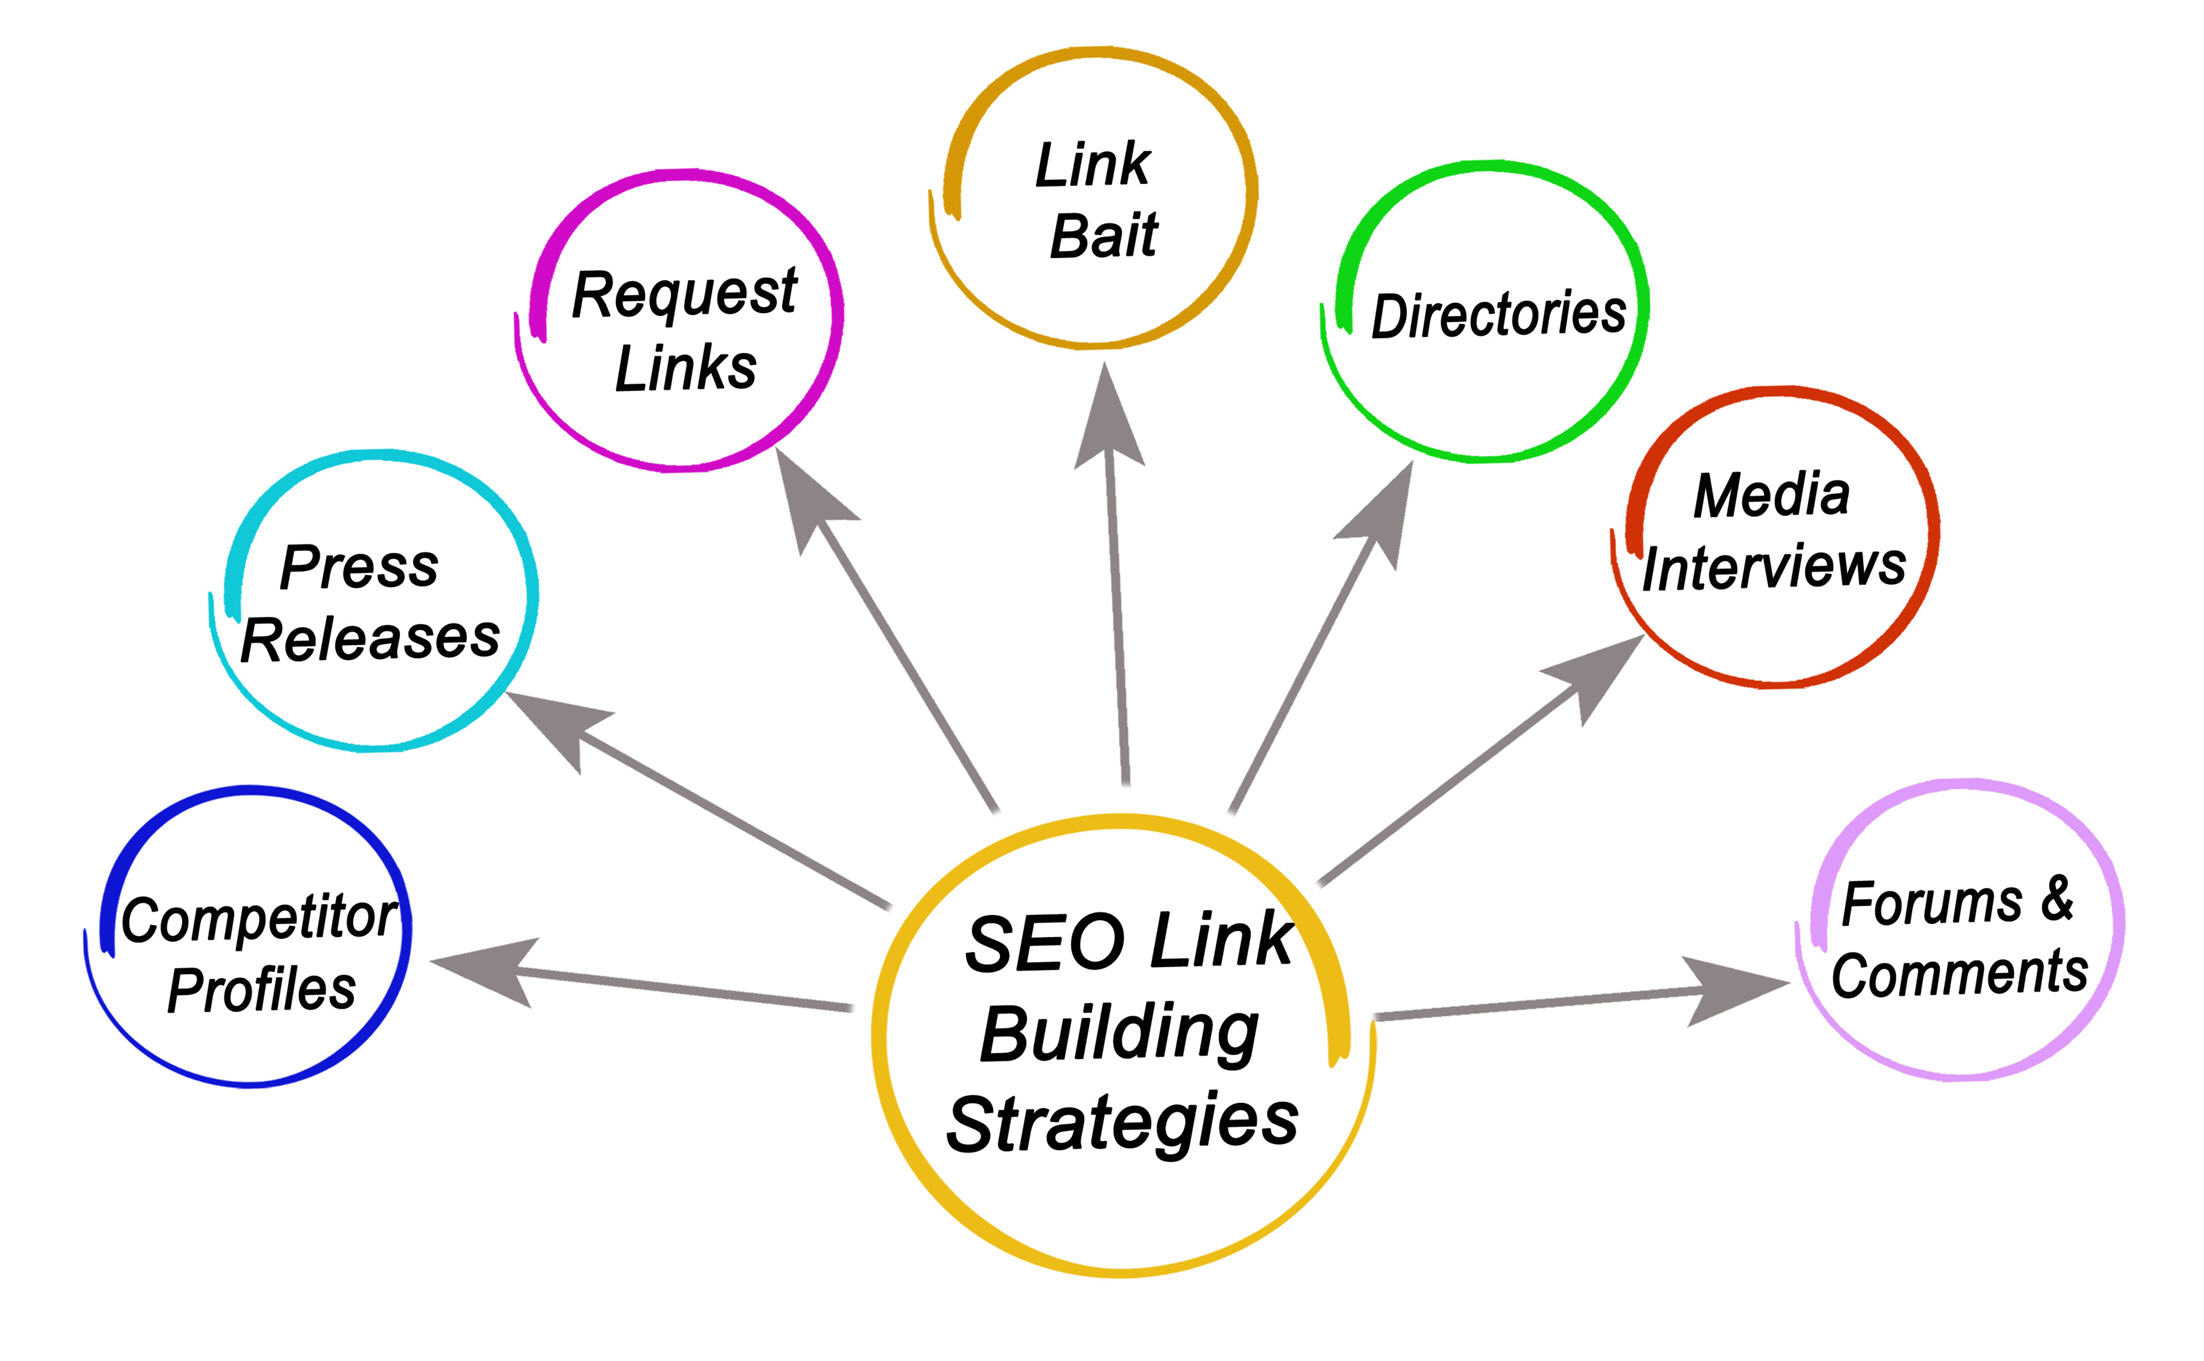 What Is a Link Building Strategy?